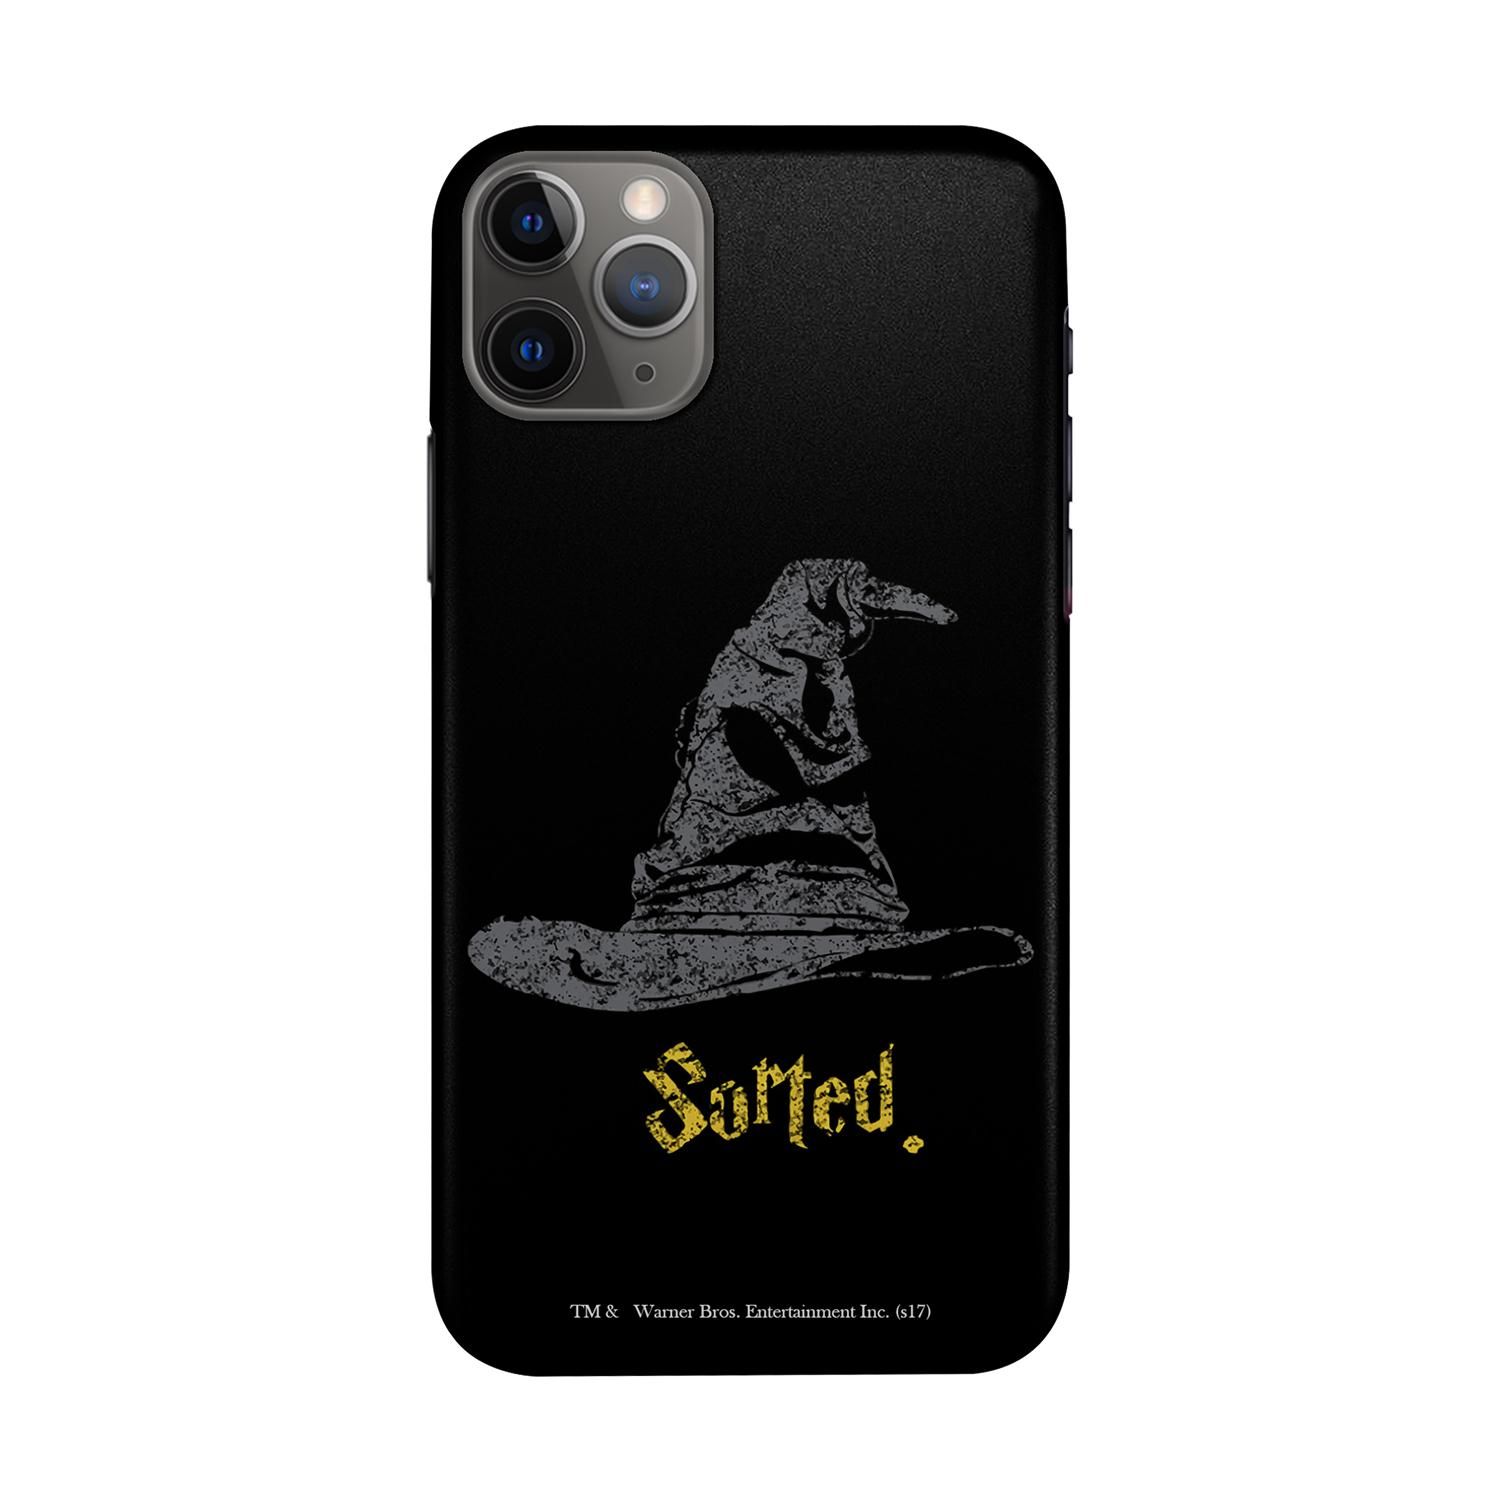 Buy Sorting Hat - Sleek Phone Case for iPhone 11 Pro Max Online